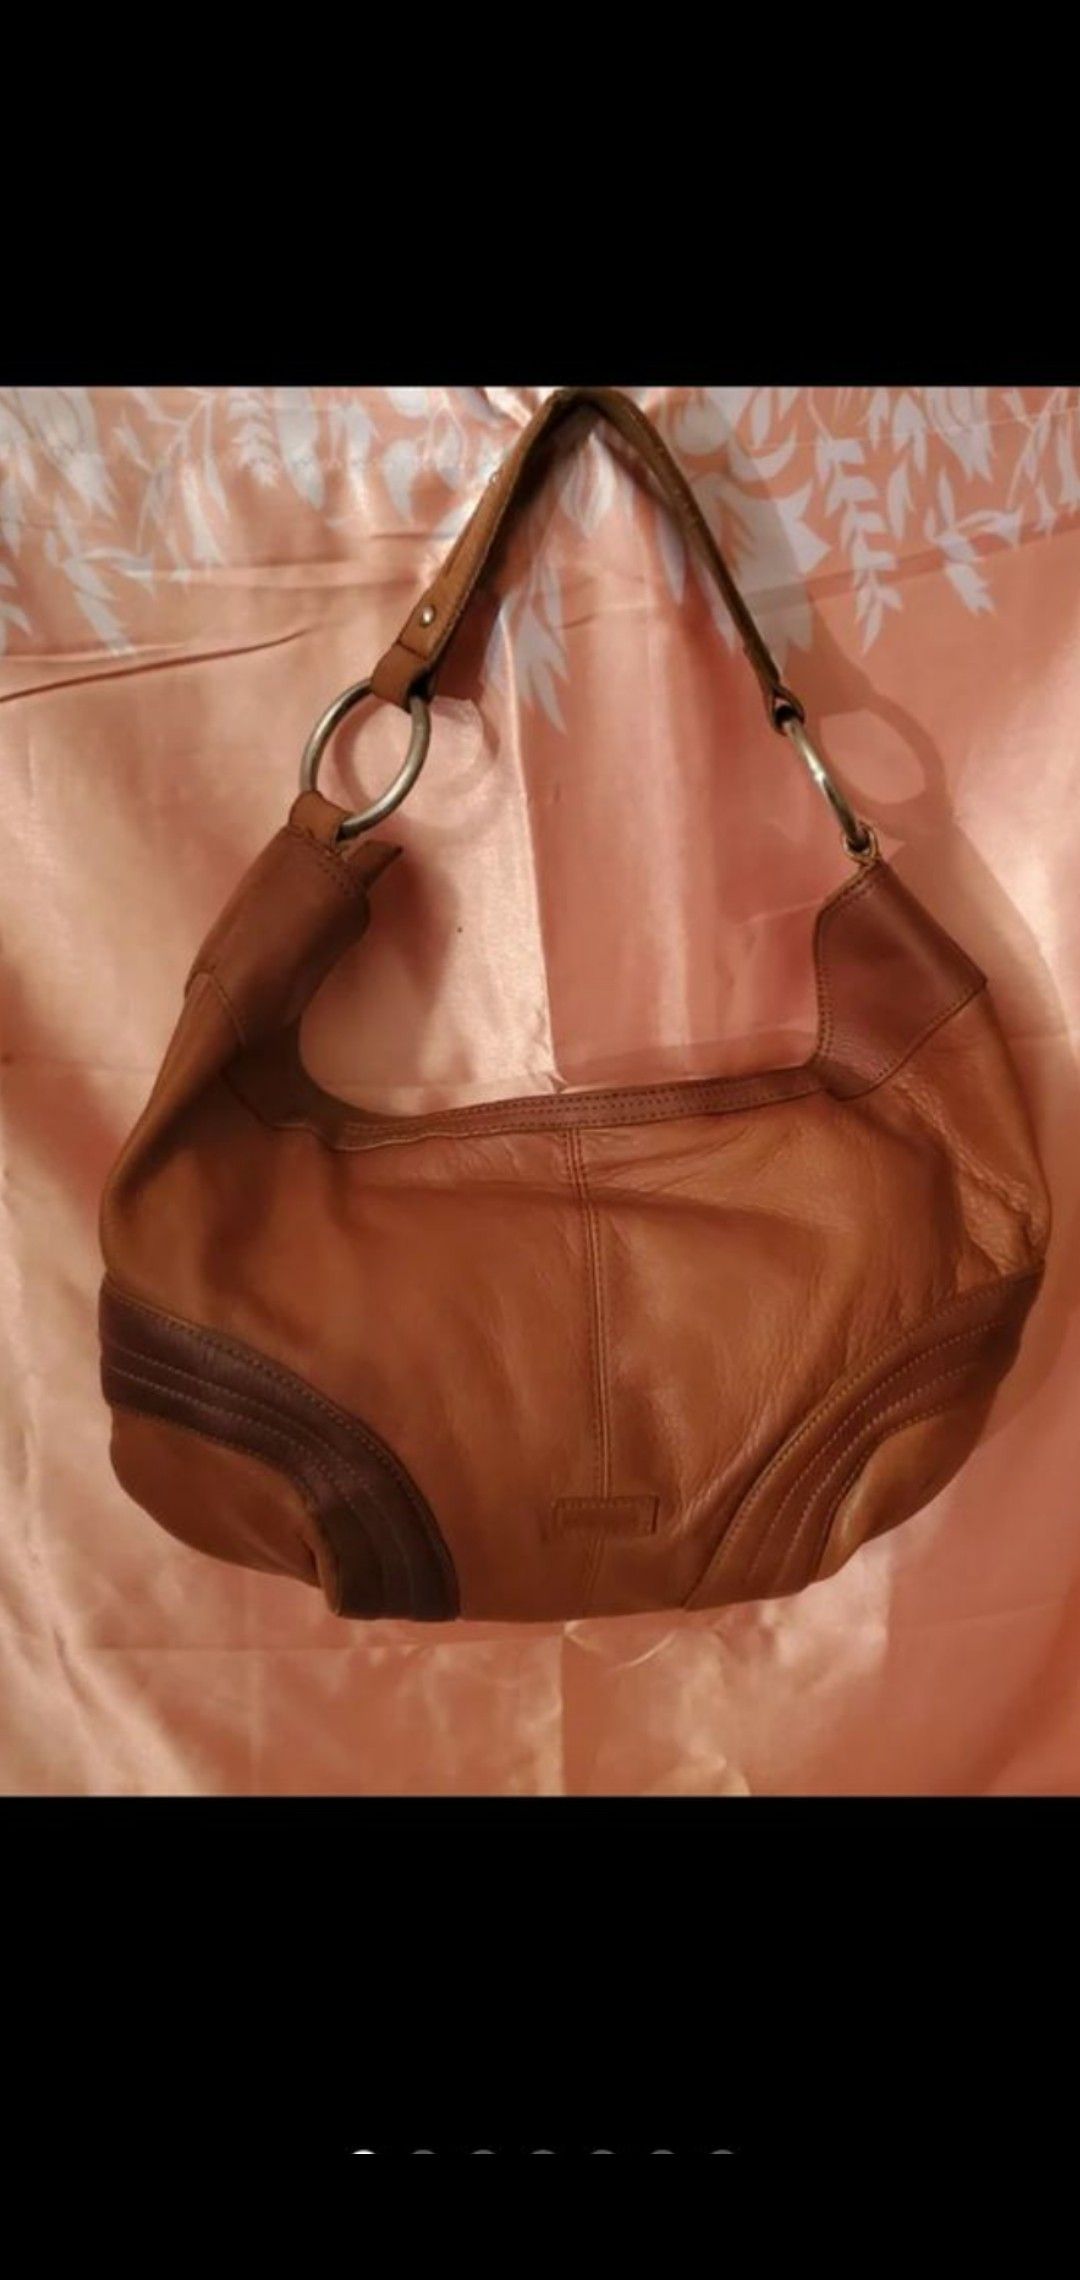 Kenneth Cole Reaction leather hobo bag excellent condition